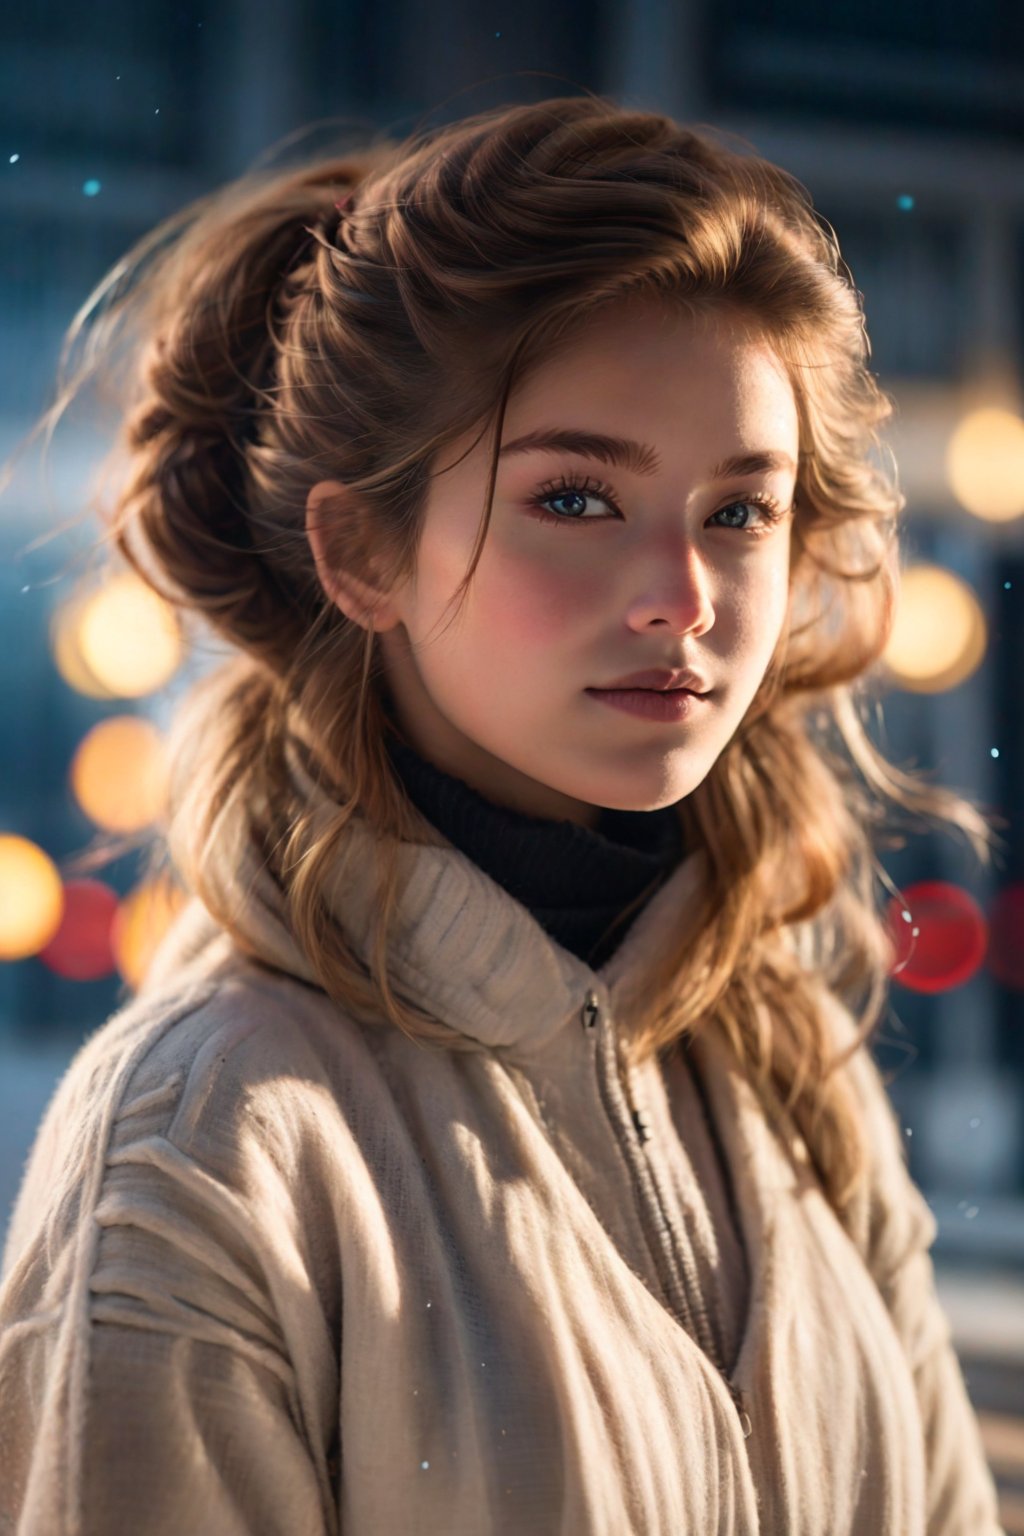 Here's the SD prompt:

Romantic Hungarian night: A stunning 16-year-old girl in a dark grey turtleneck sweater, with twin tails framing her beautiful face under soft light and city lights at night casting a warm glow. She looks directly at the camera with a subtle grin (0.7), surrounded by champagne and hints of a wedding dress. Capture her perfect anatomy and delicate features in photorealistic 8K portrait style.,PHOTOREALPRO